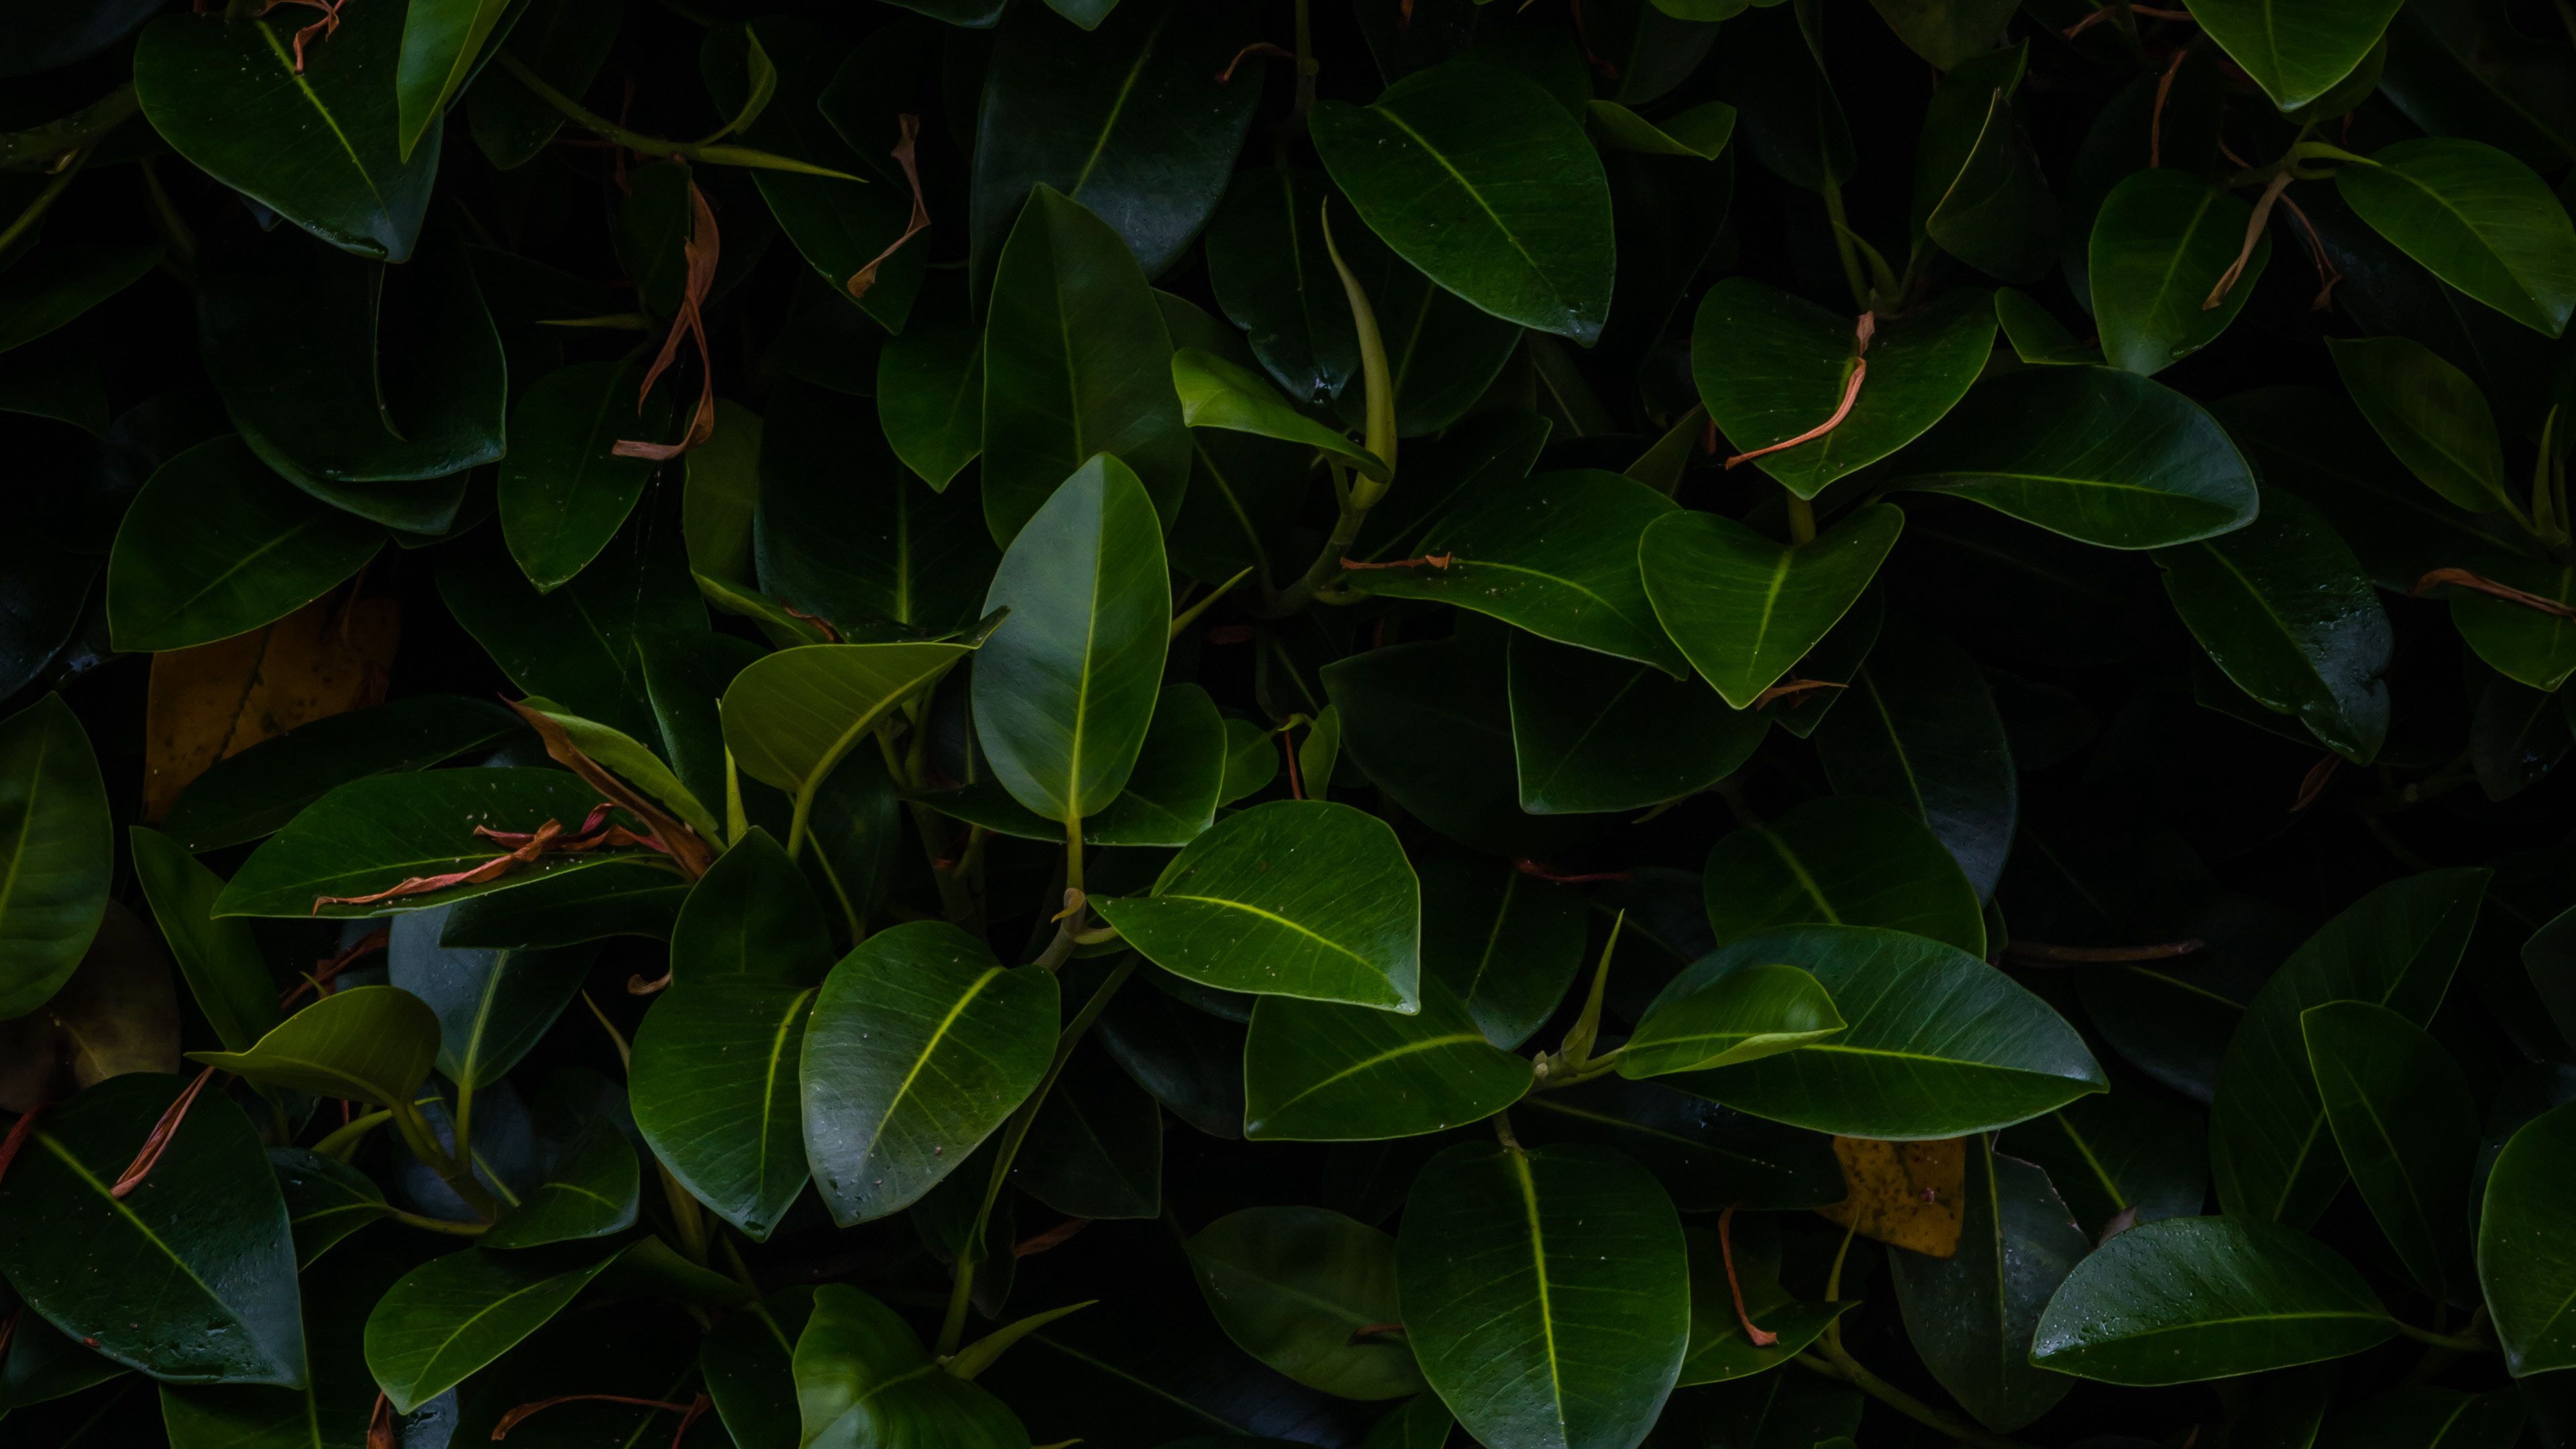 Leaves 4K wallpapers for your desktop or mobile screen free and easy to